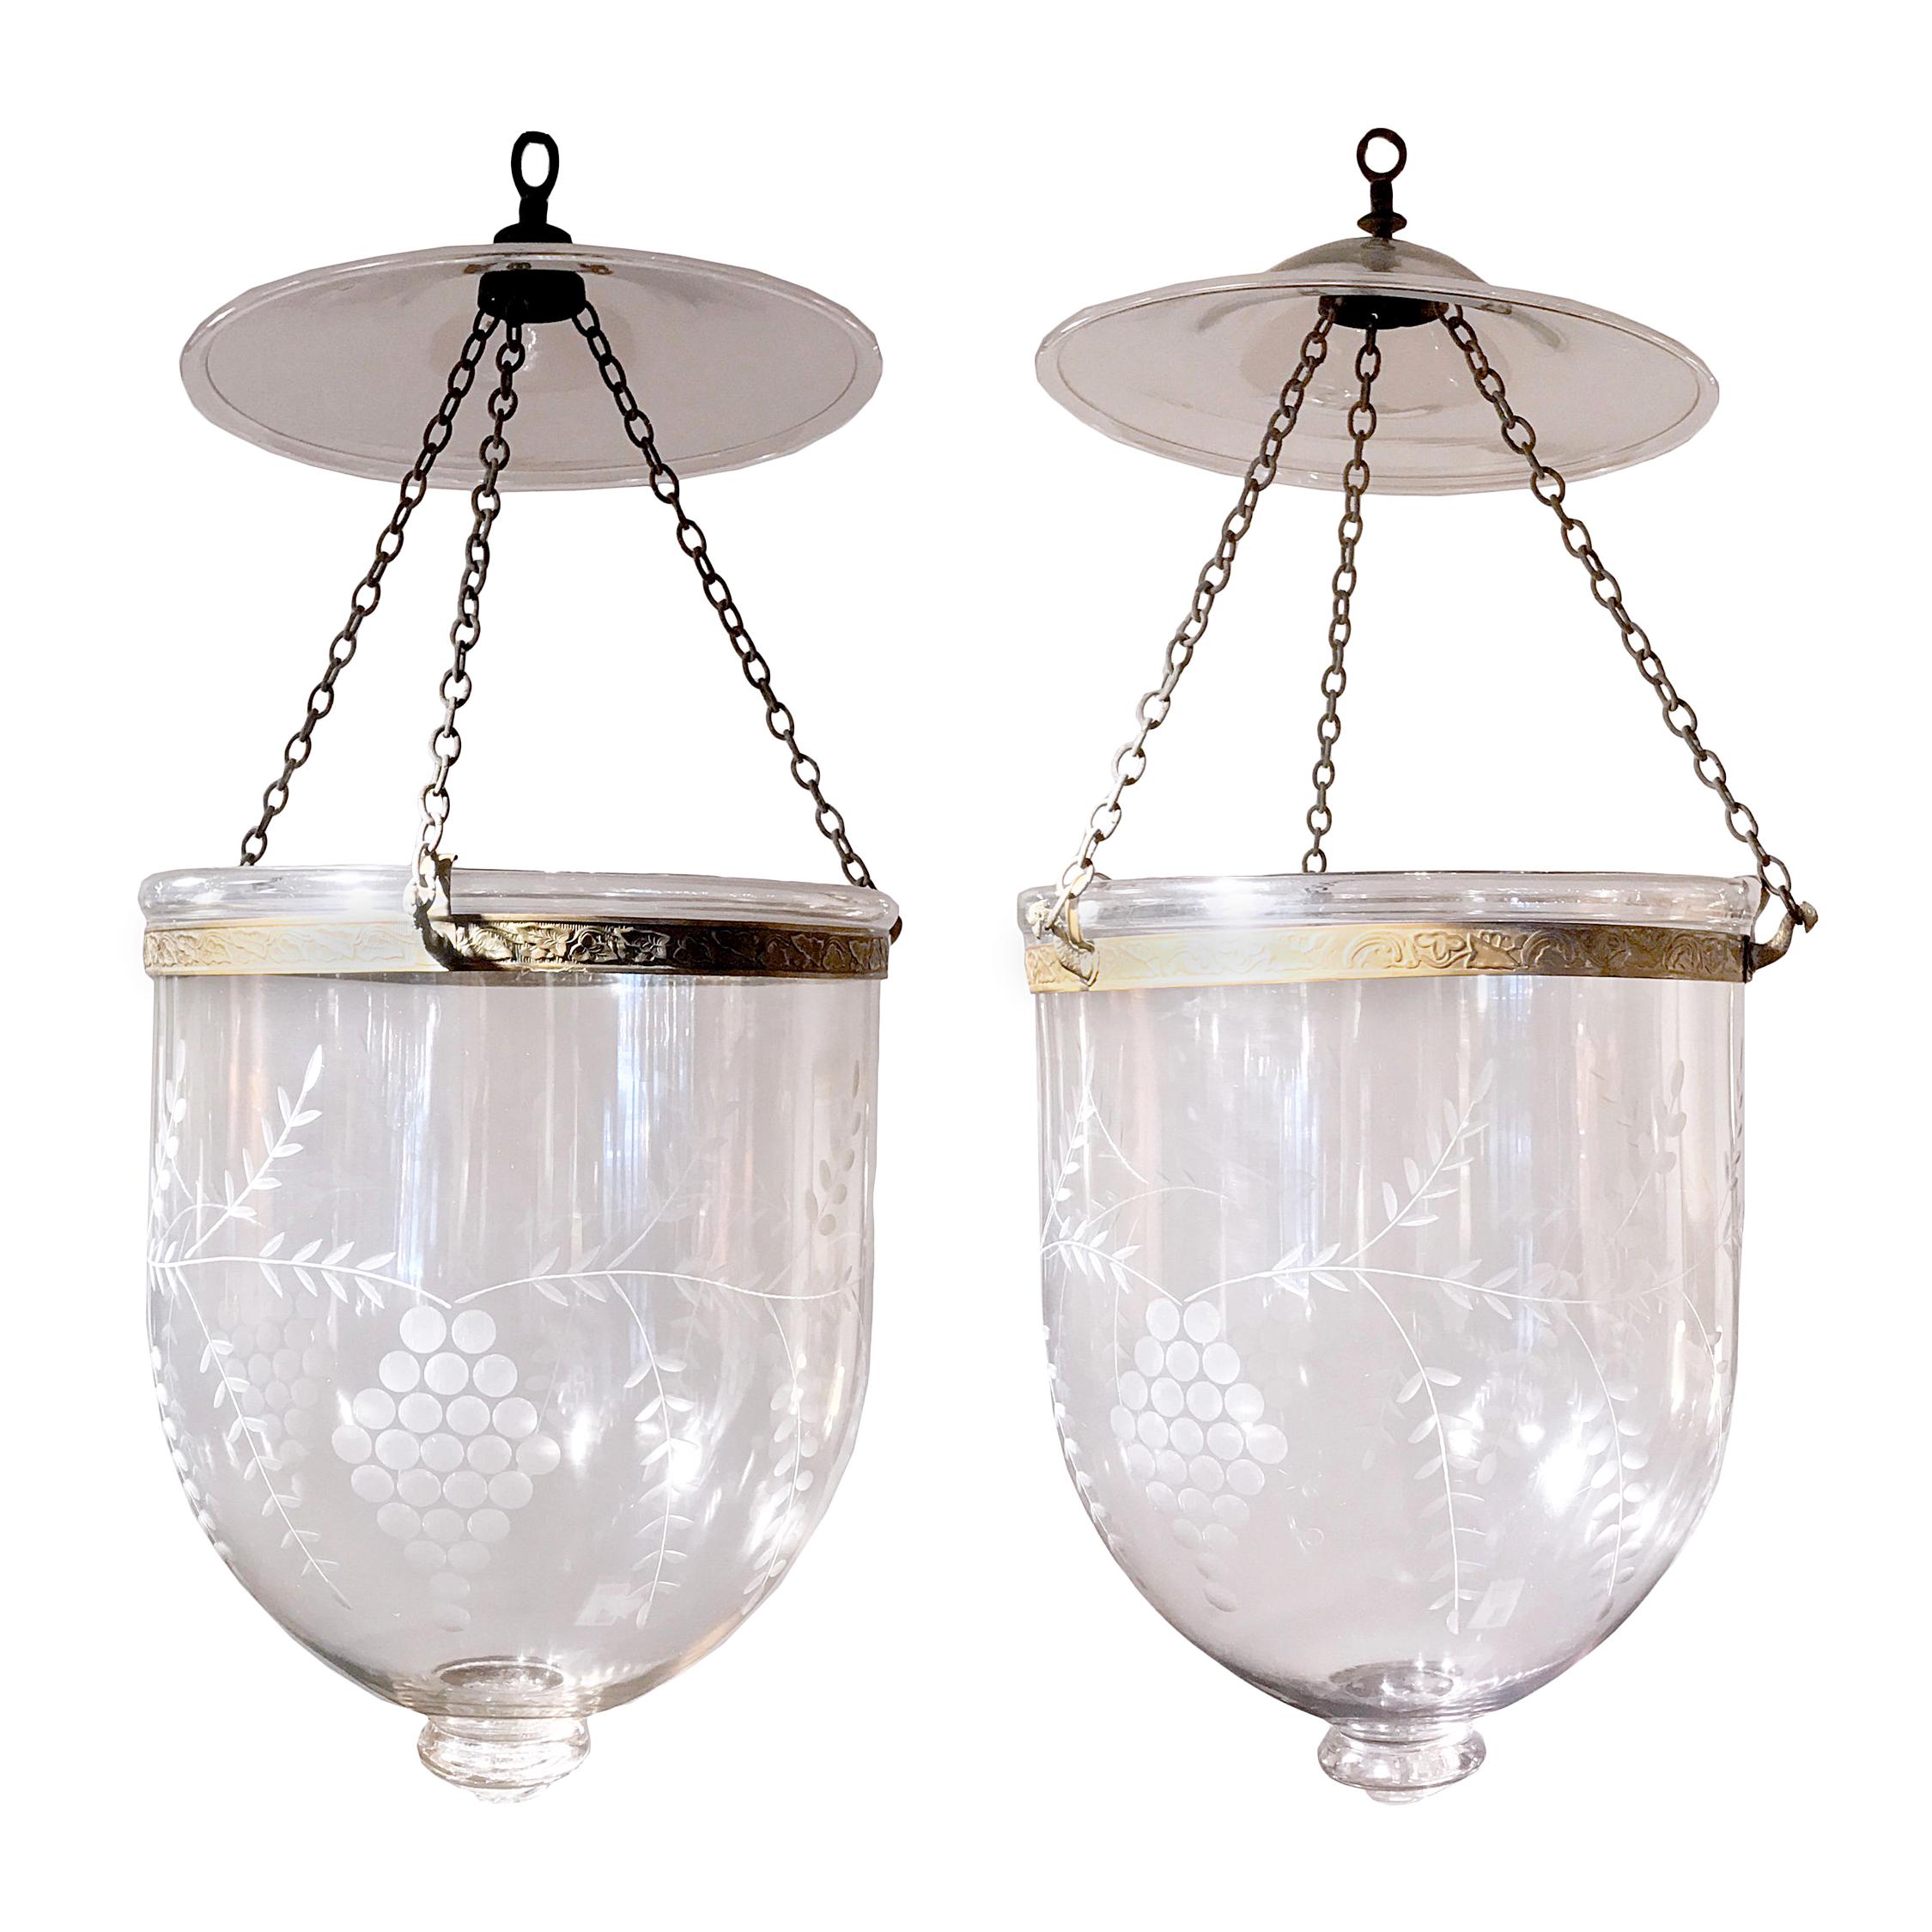 Pair of Hand Blown Glass Bell Jar Lanterns with Grape Etching